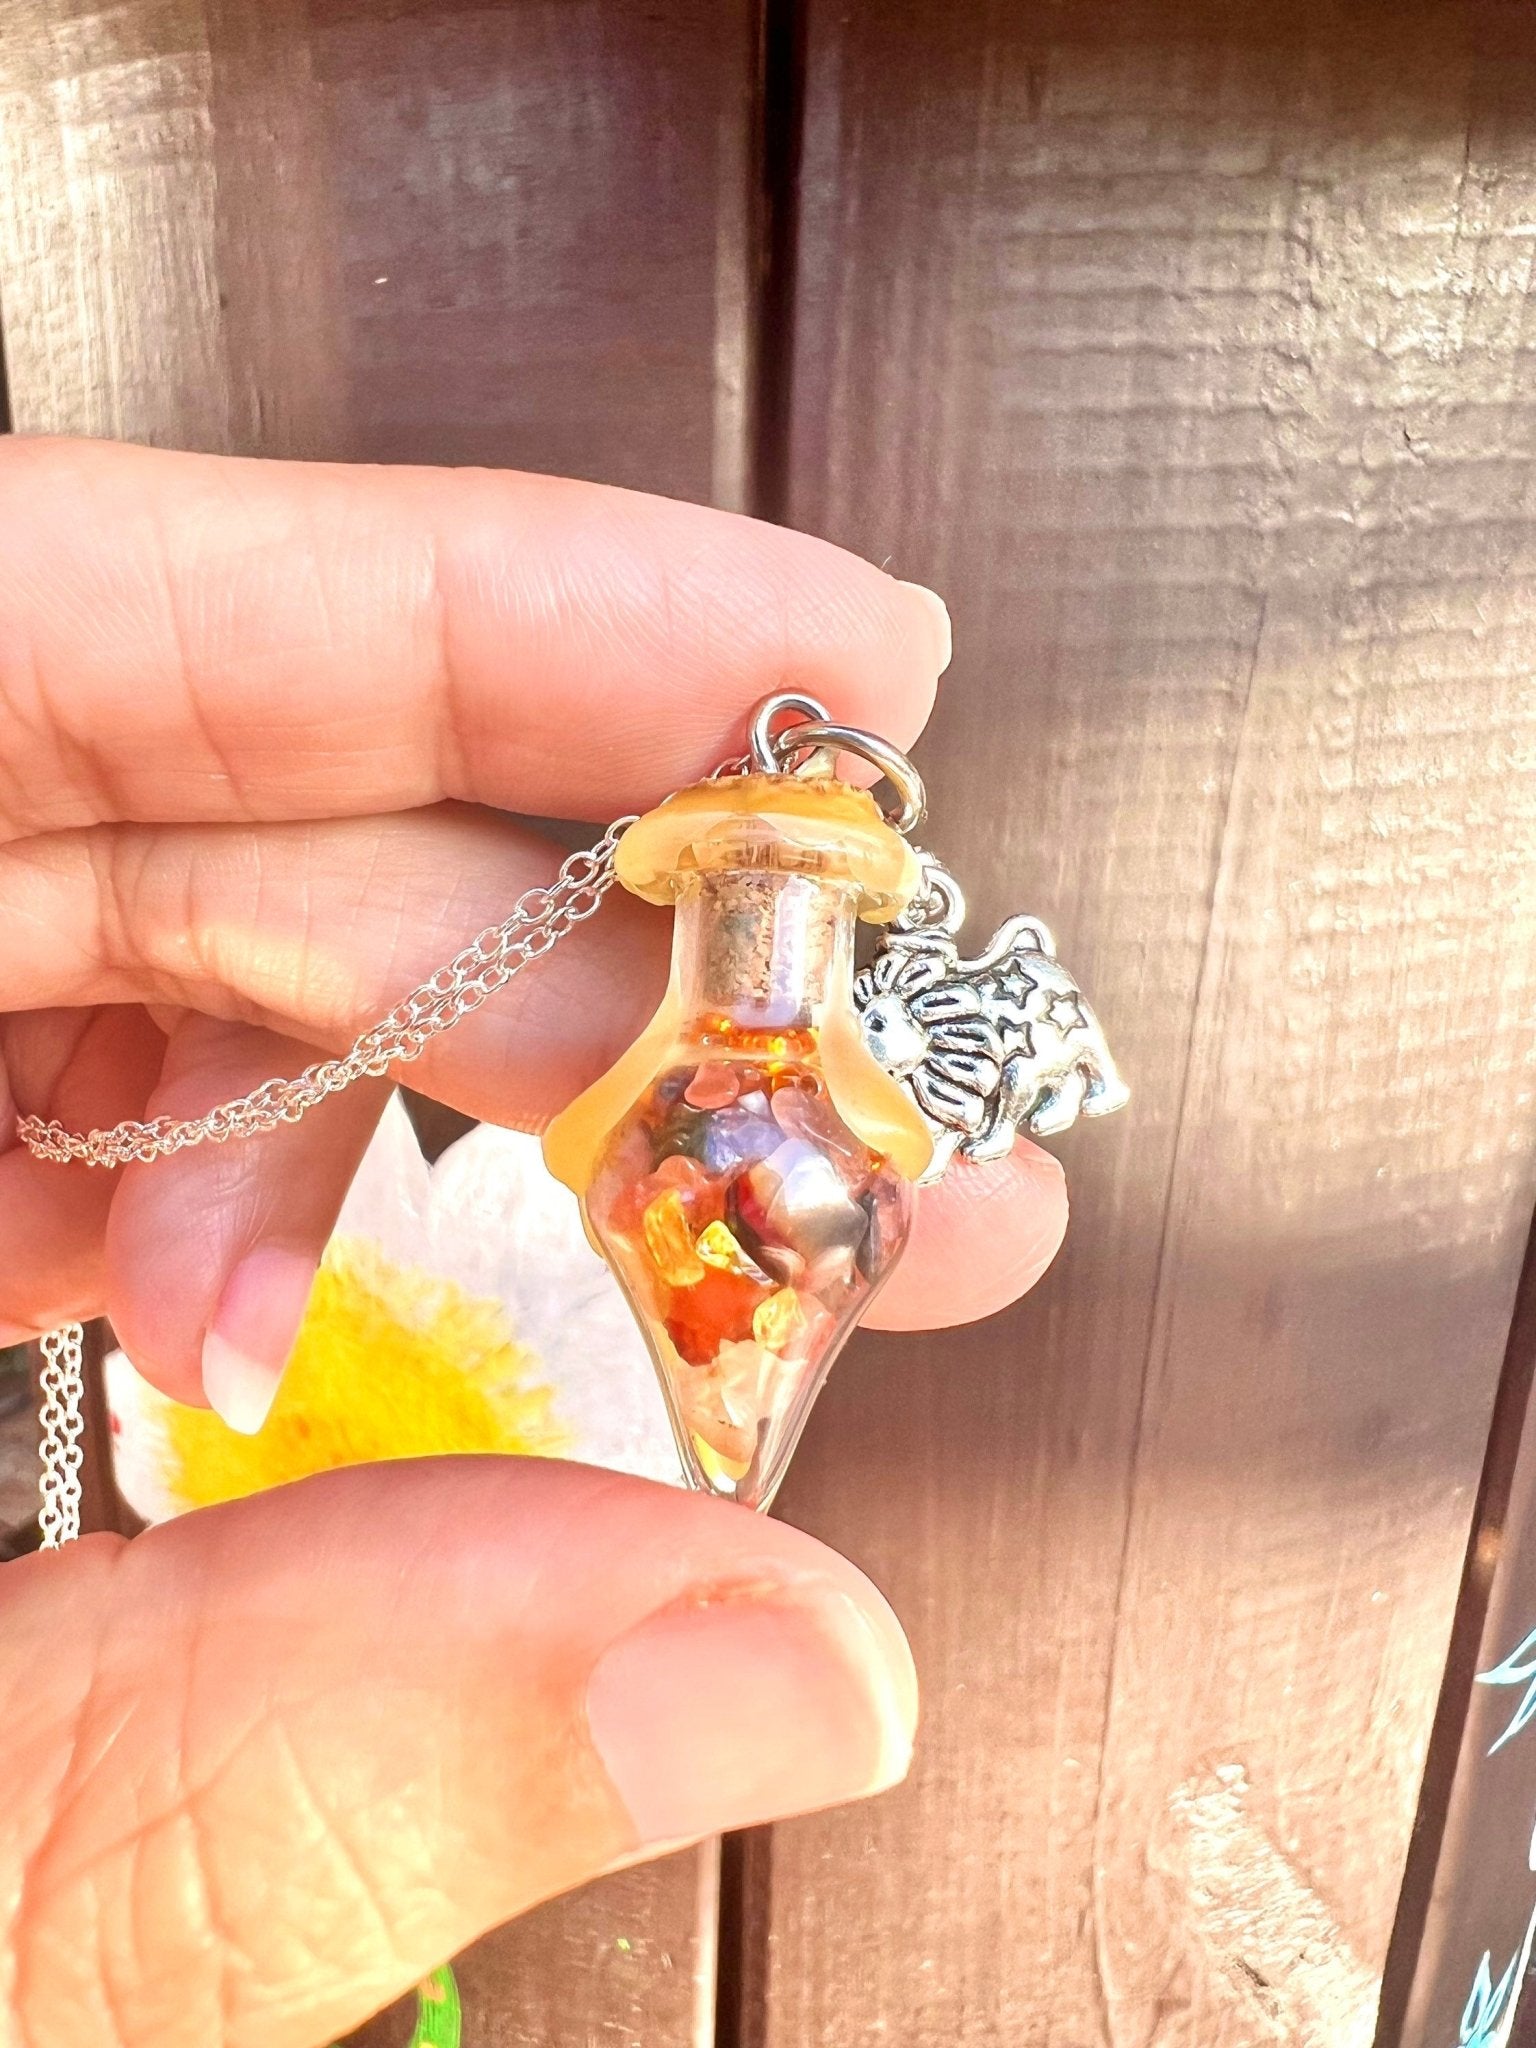 Zodiac Crystals Necklace Spell Jar Bottle - 12 Astrology Horoscope Signs Jewelry Charms Sterling Silver Chain - MysticBluuMoonTarot